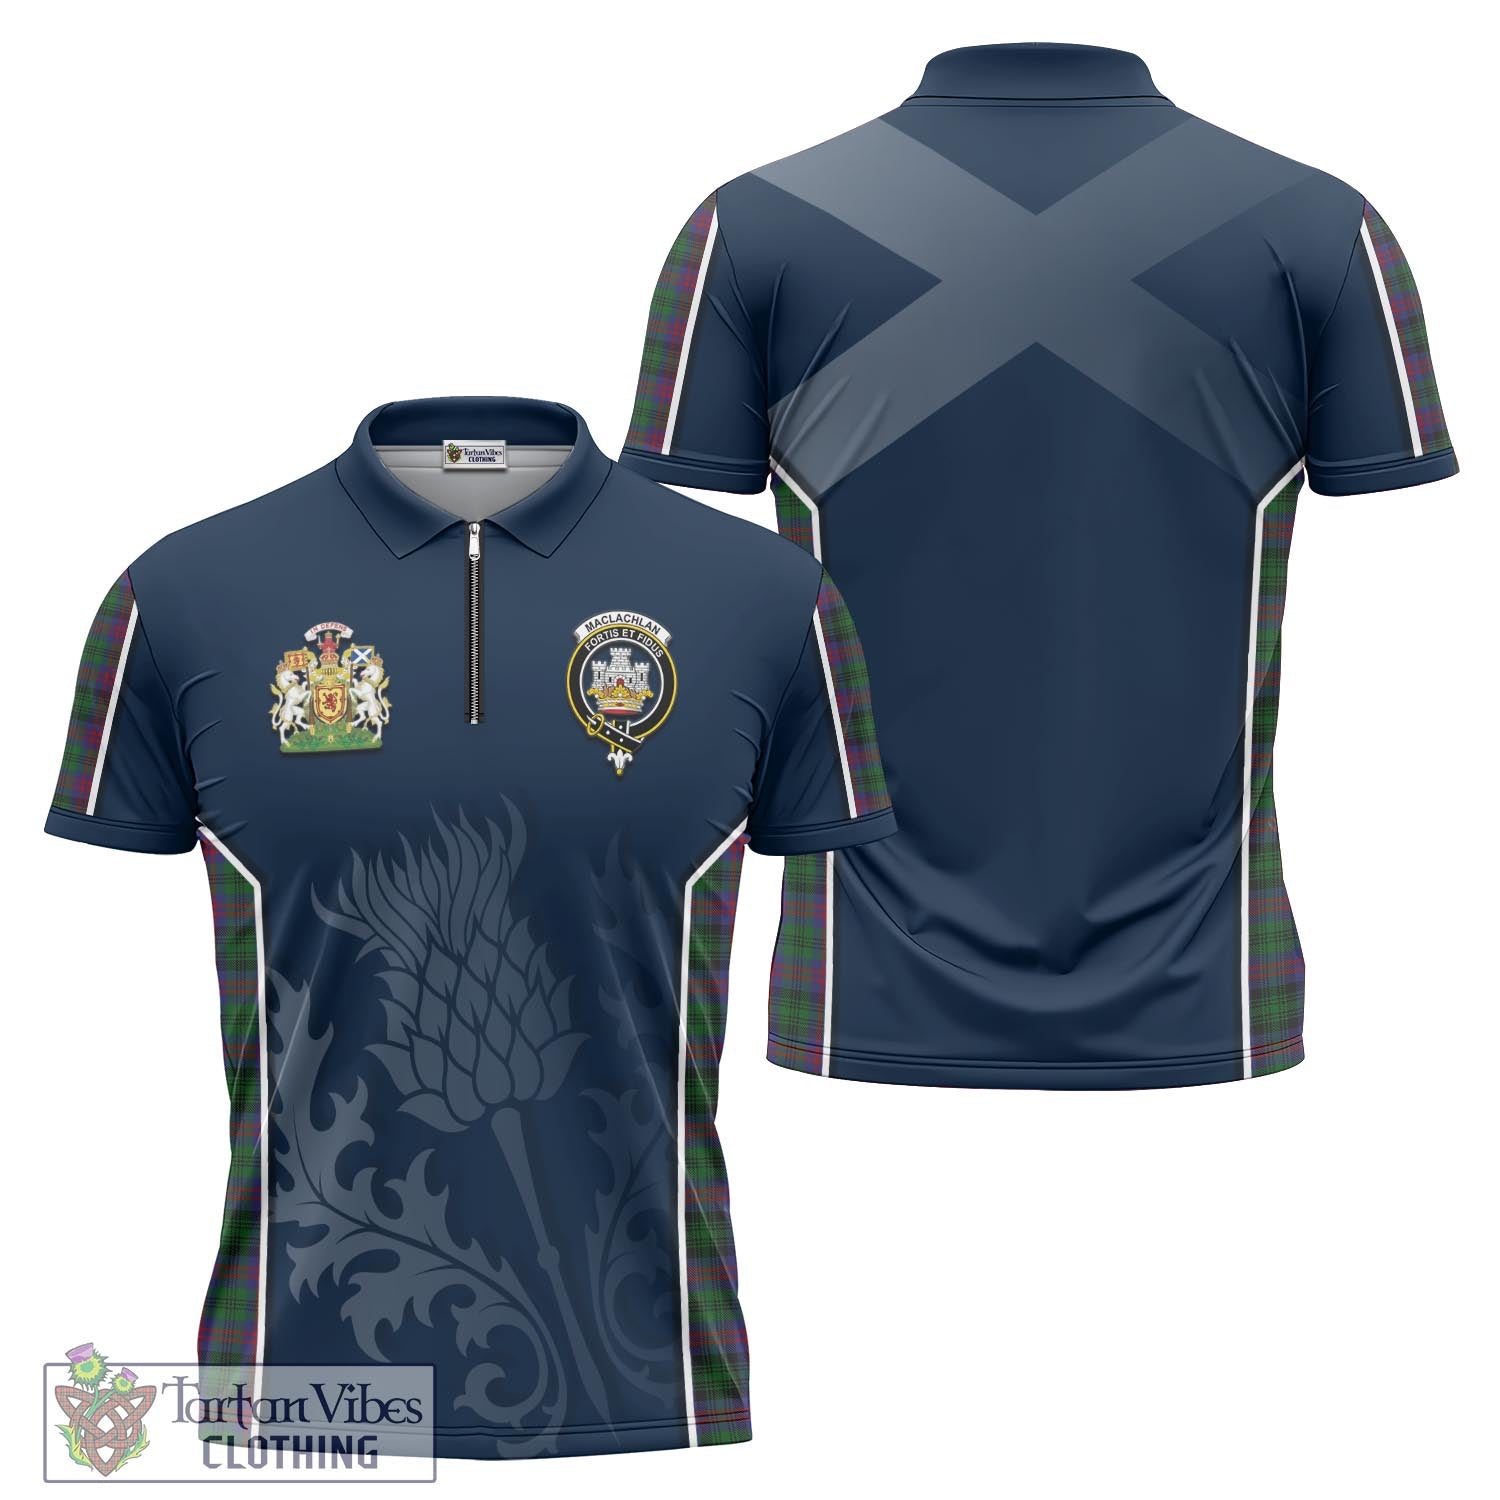 Tartan Vibes Clothing MacLachlan Hunting Tartan Zipper Polo Shirt with Family Crest and Scottish Thistle Vibes Sport Style